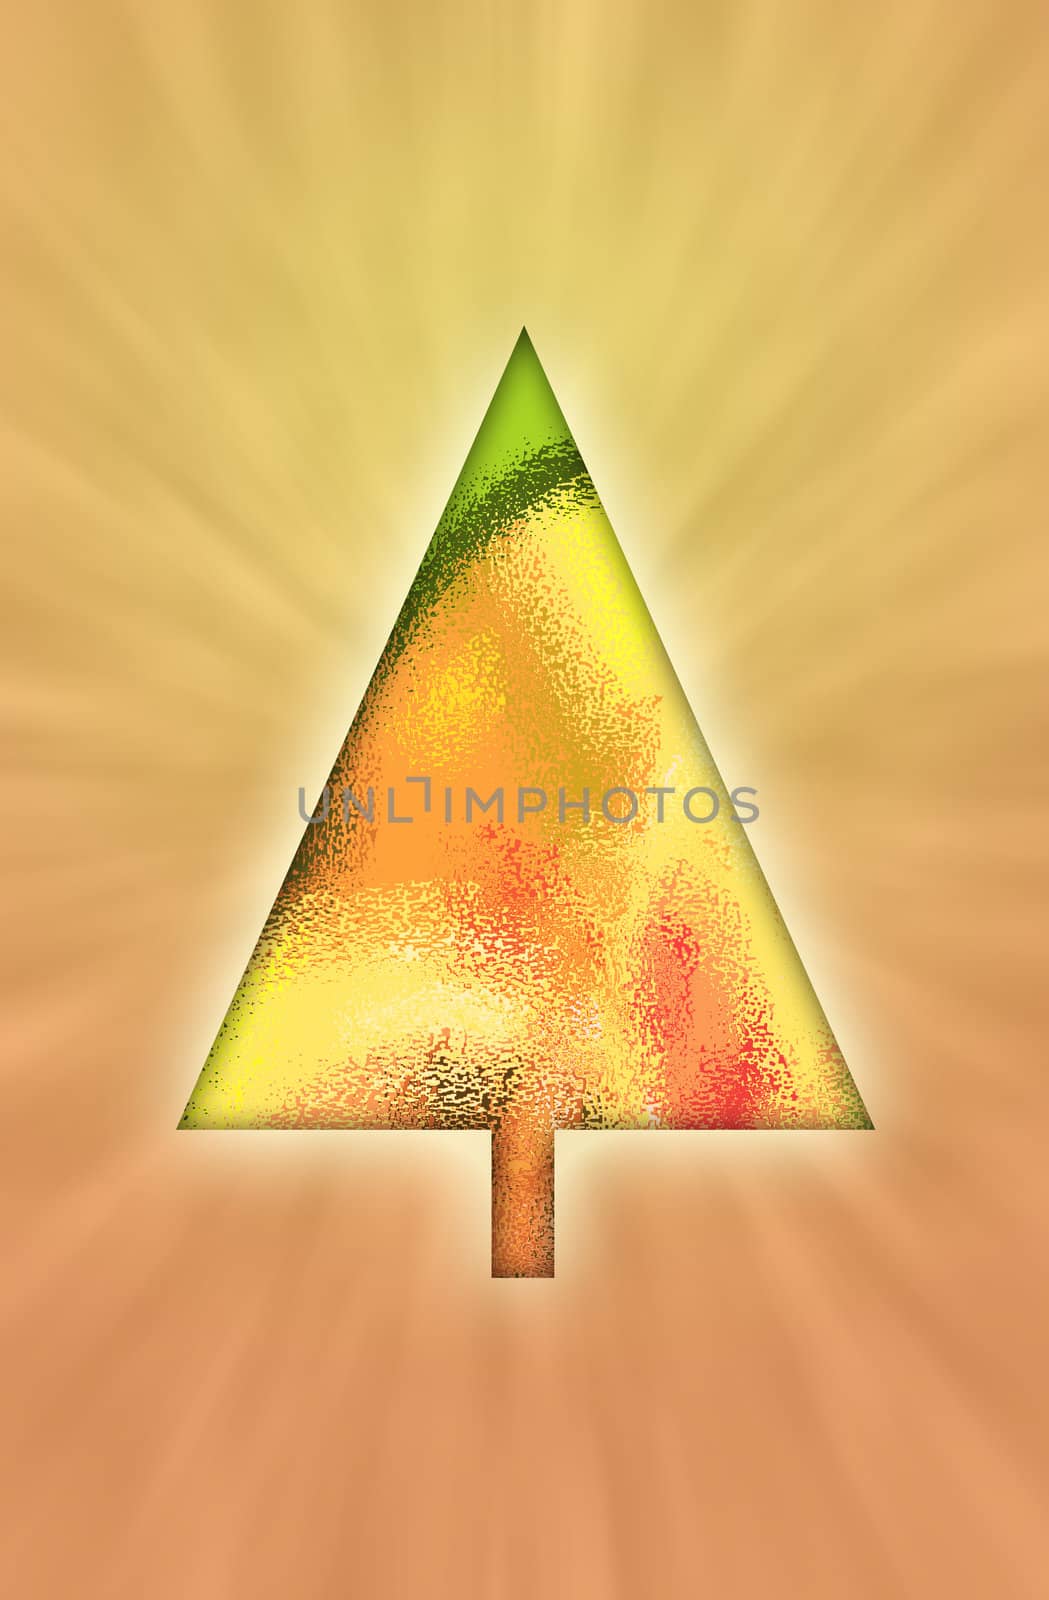 Retro bright colored Christmas tree background with sun rays